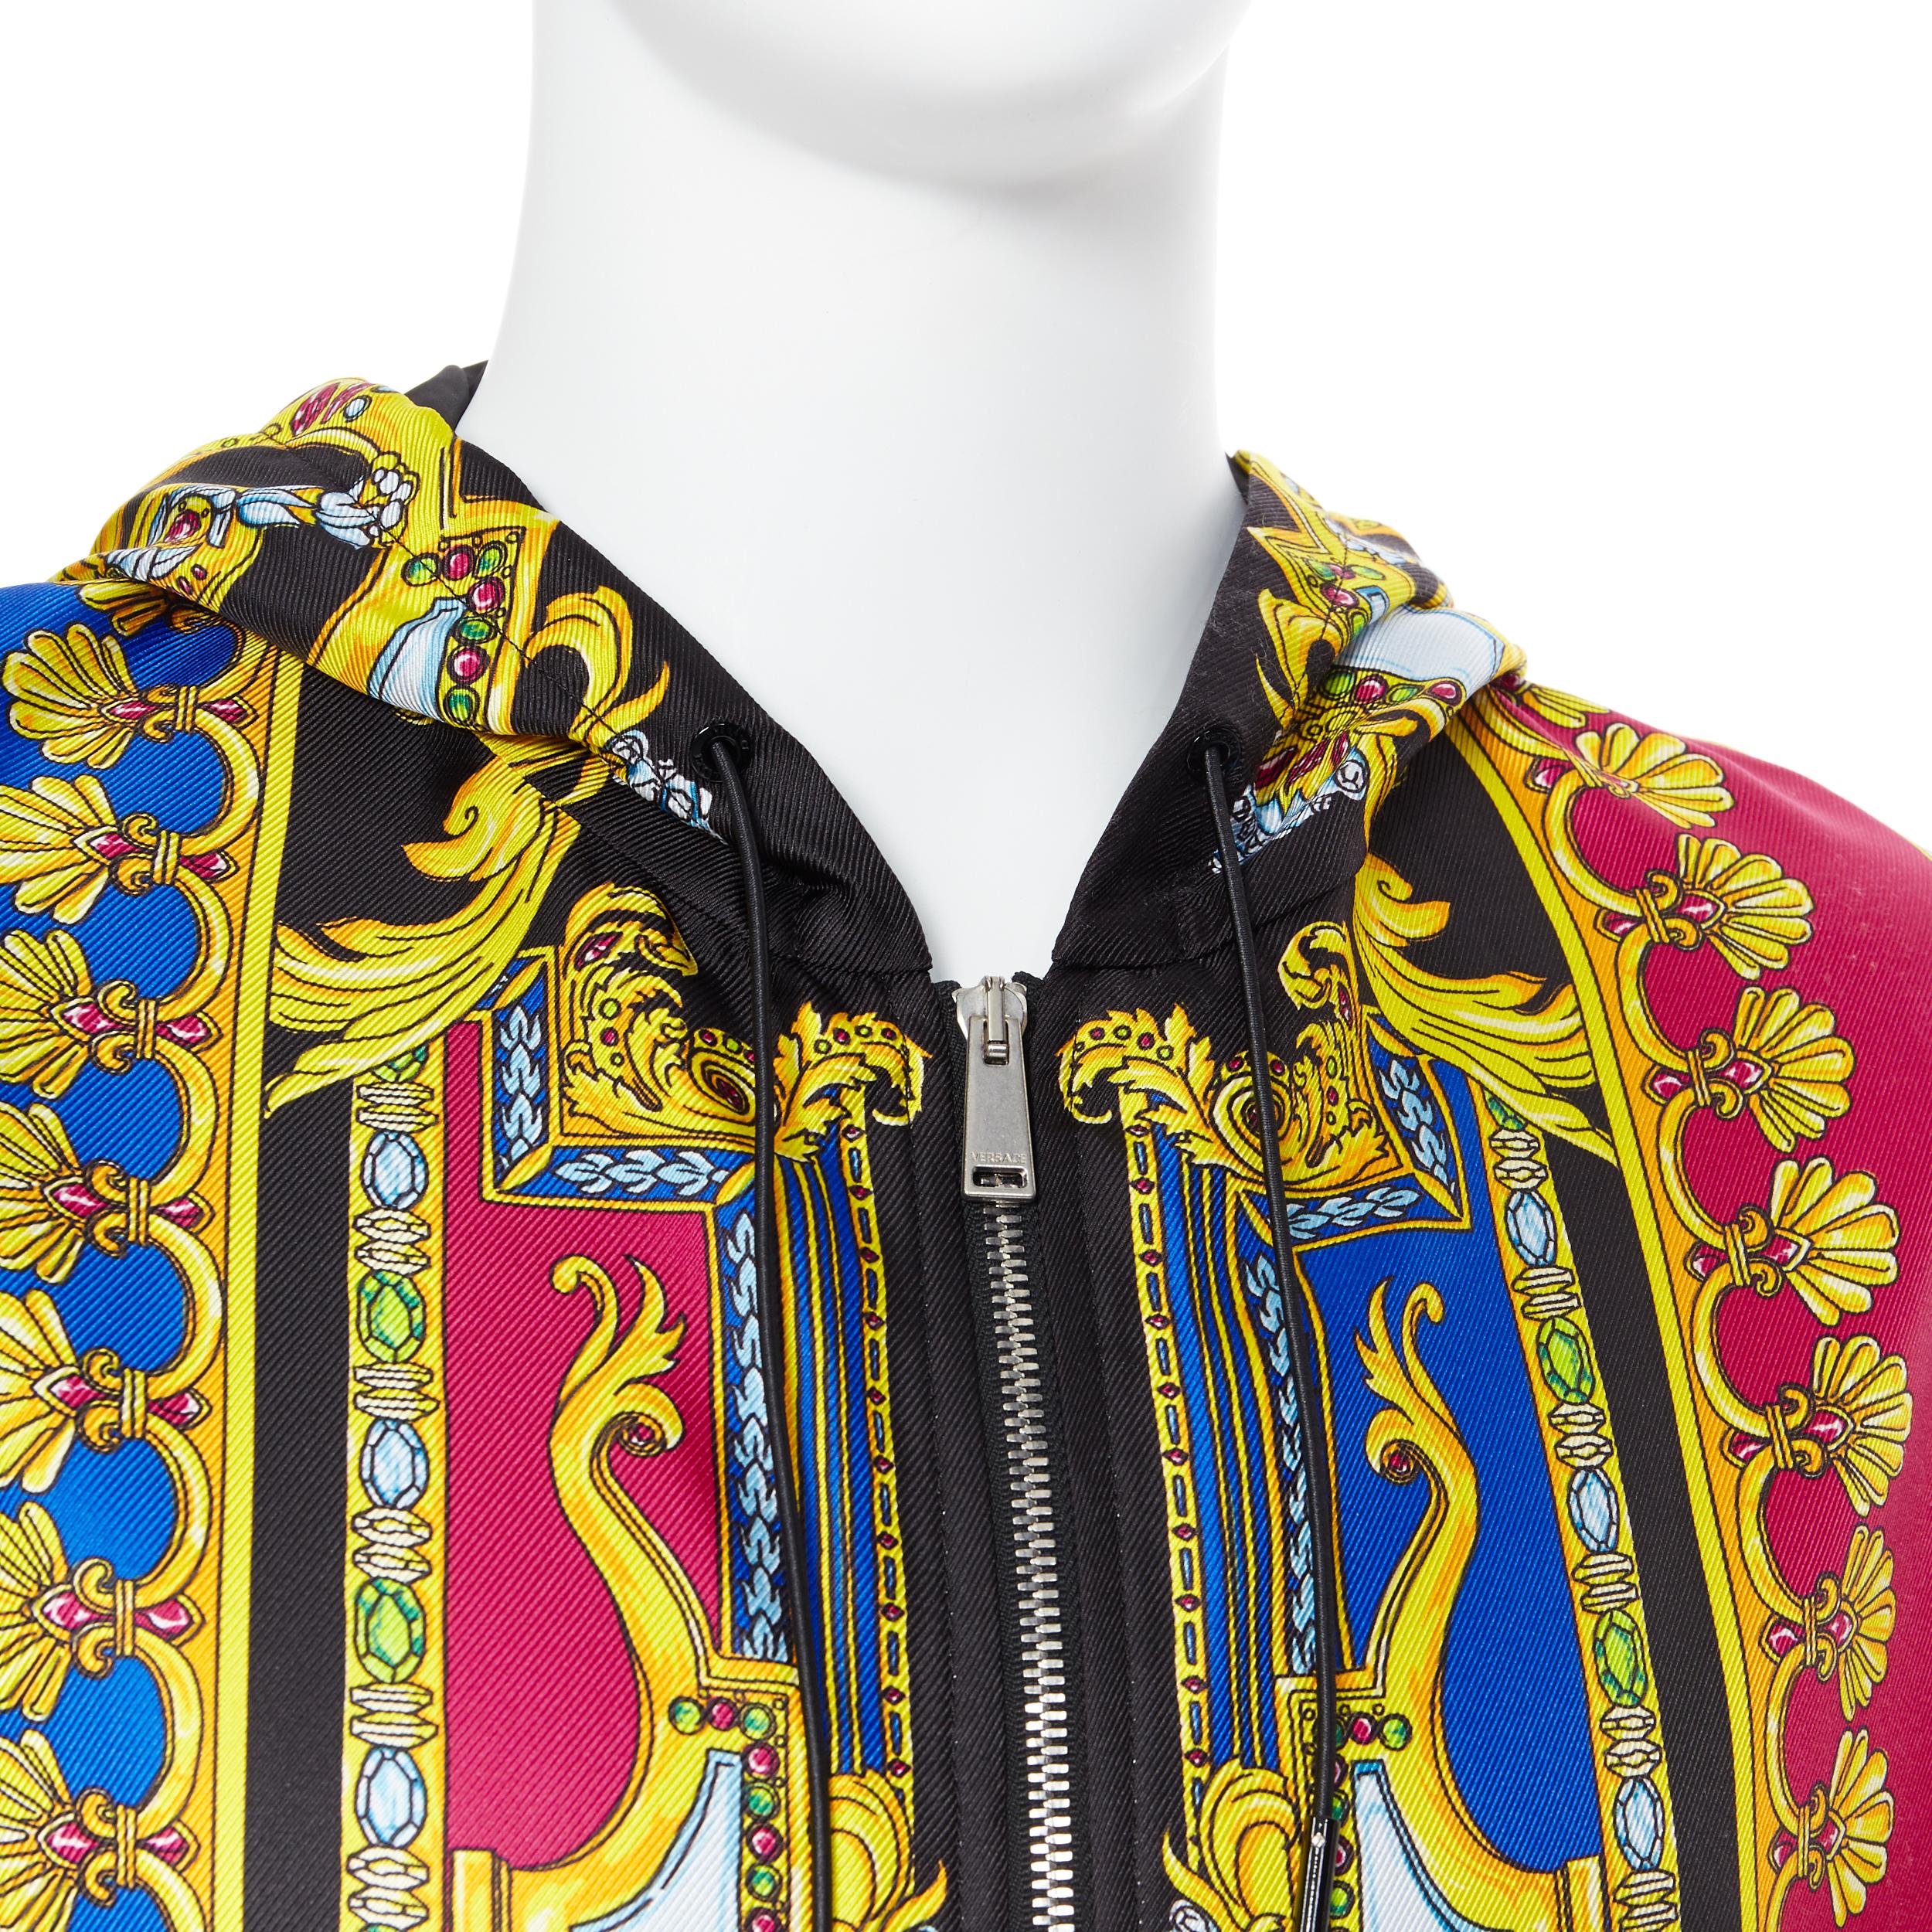 new VERSACE 100% silk 2019 Gioelleria Jewel Baroque print hoodie jacket IT54 2XL
Brand: Versace
Designer: Donatella Versace
Collection: 2019
Model Name / Style: Silk hoodie
Material: Silk
Color: Multicolour
Pattern: Other
Closure: Zip
Extra Detail: